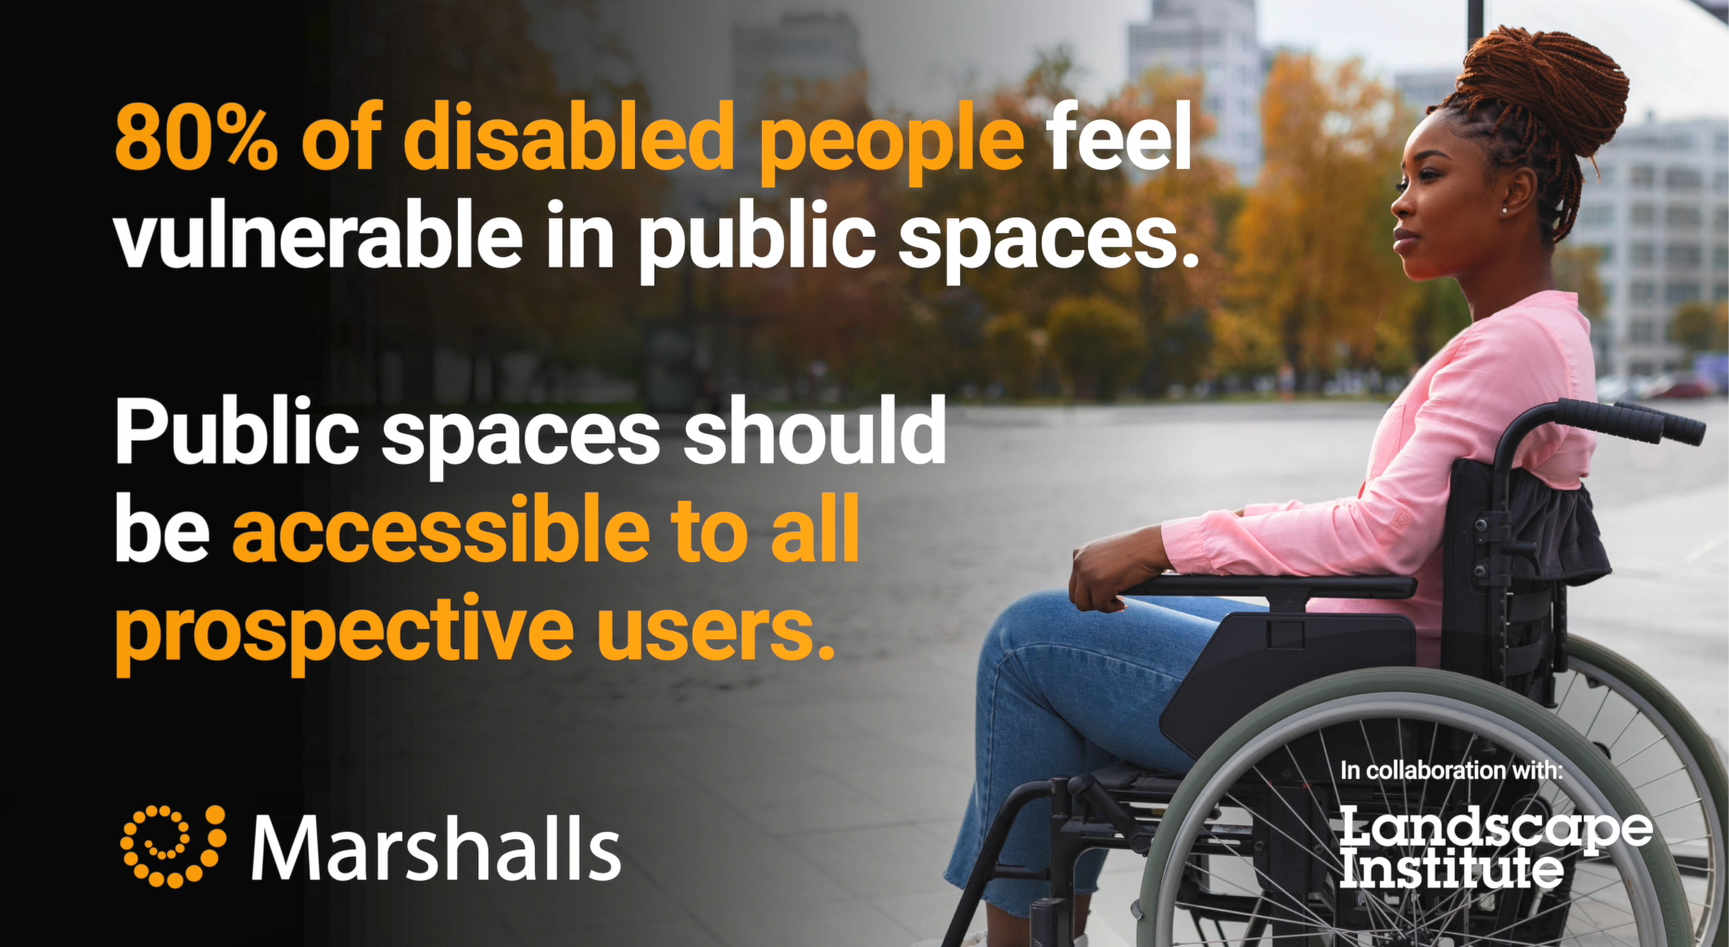 80% of disabled people feel vulnerable in public spaces. Public spaces should be accessible to all prospective users.